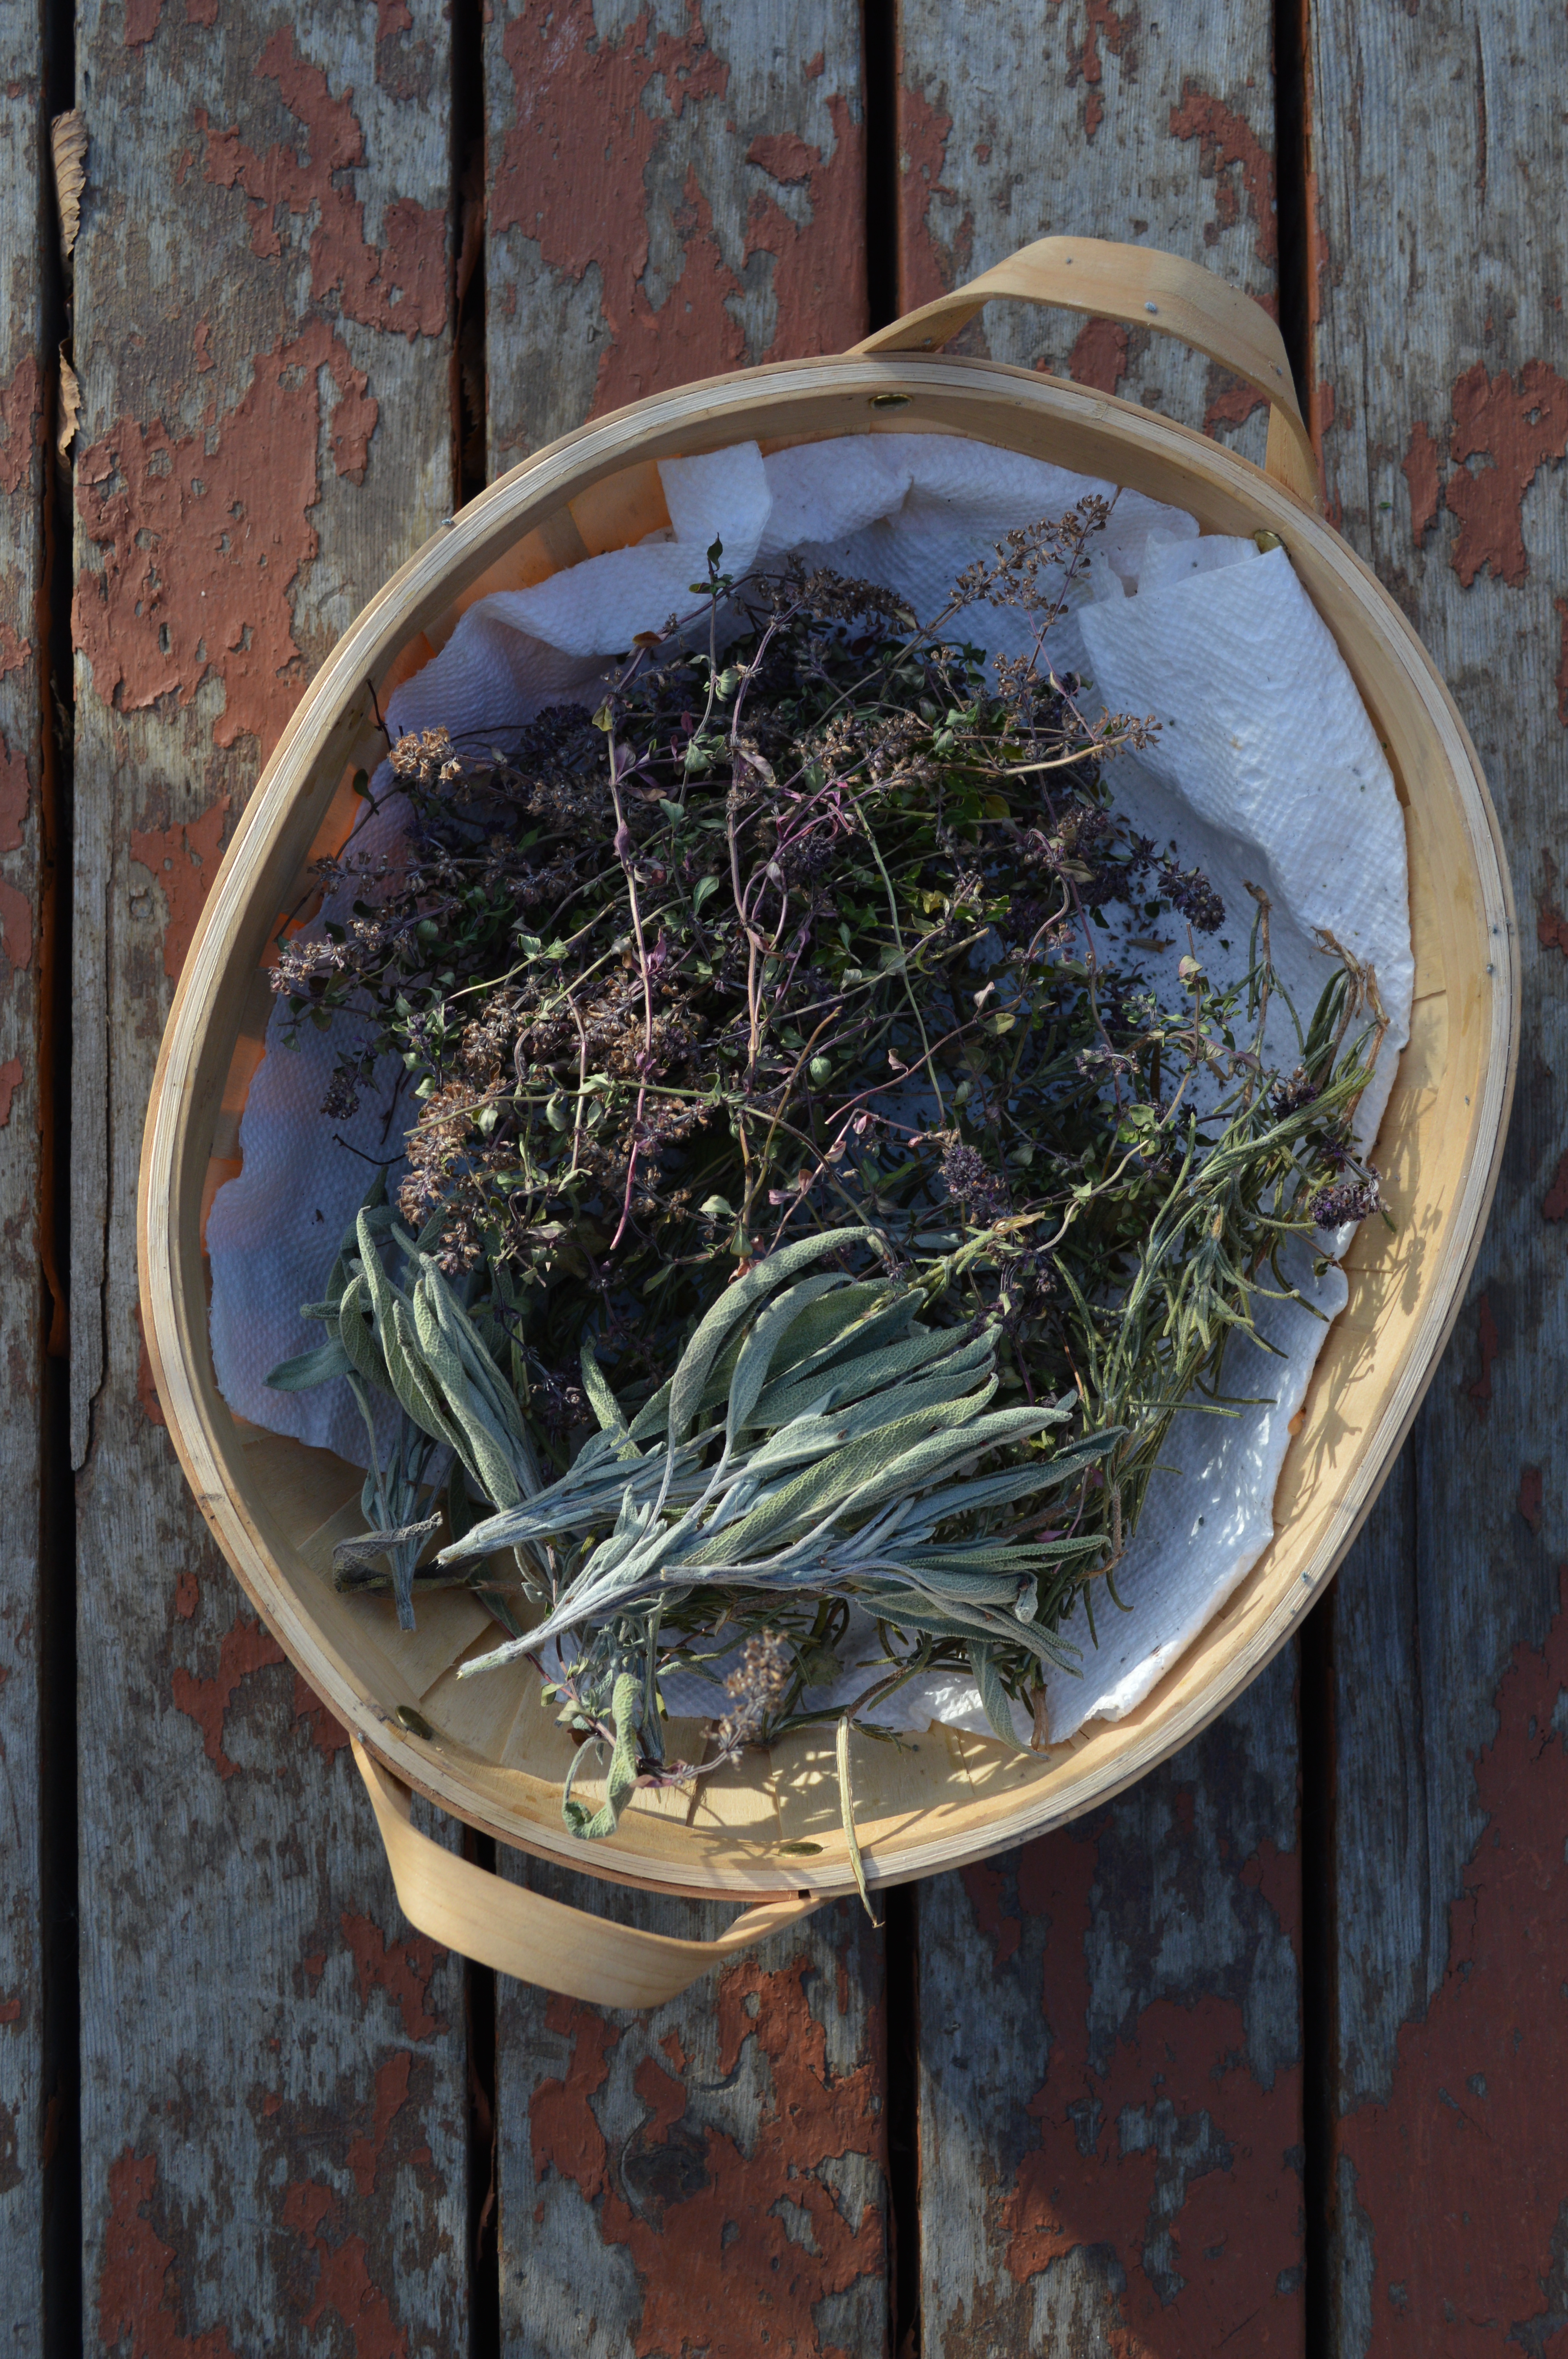 A basket of dried herbs